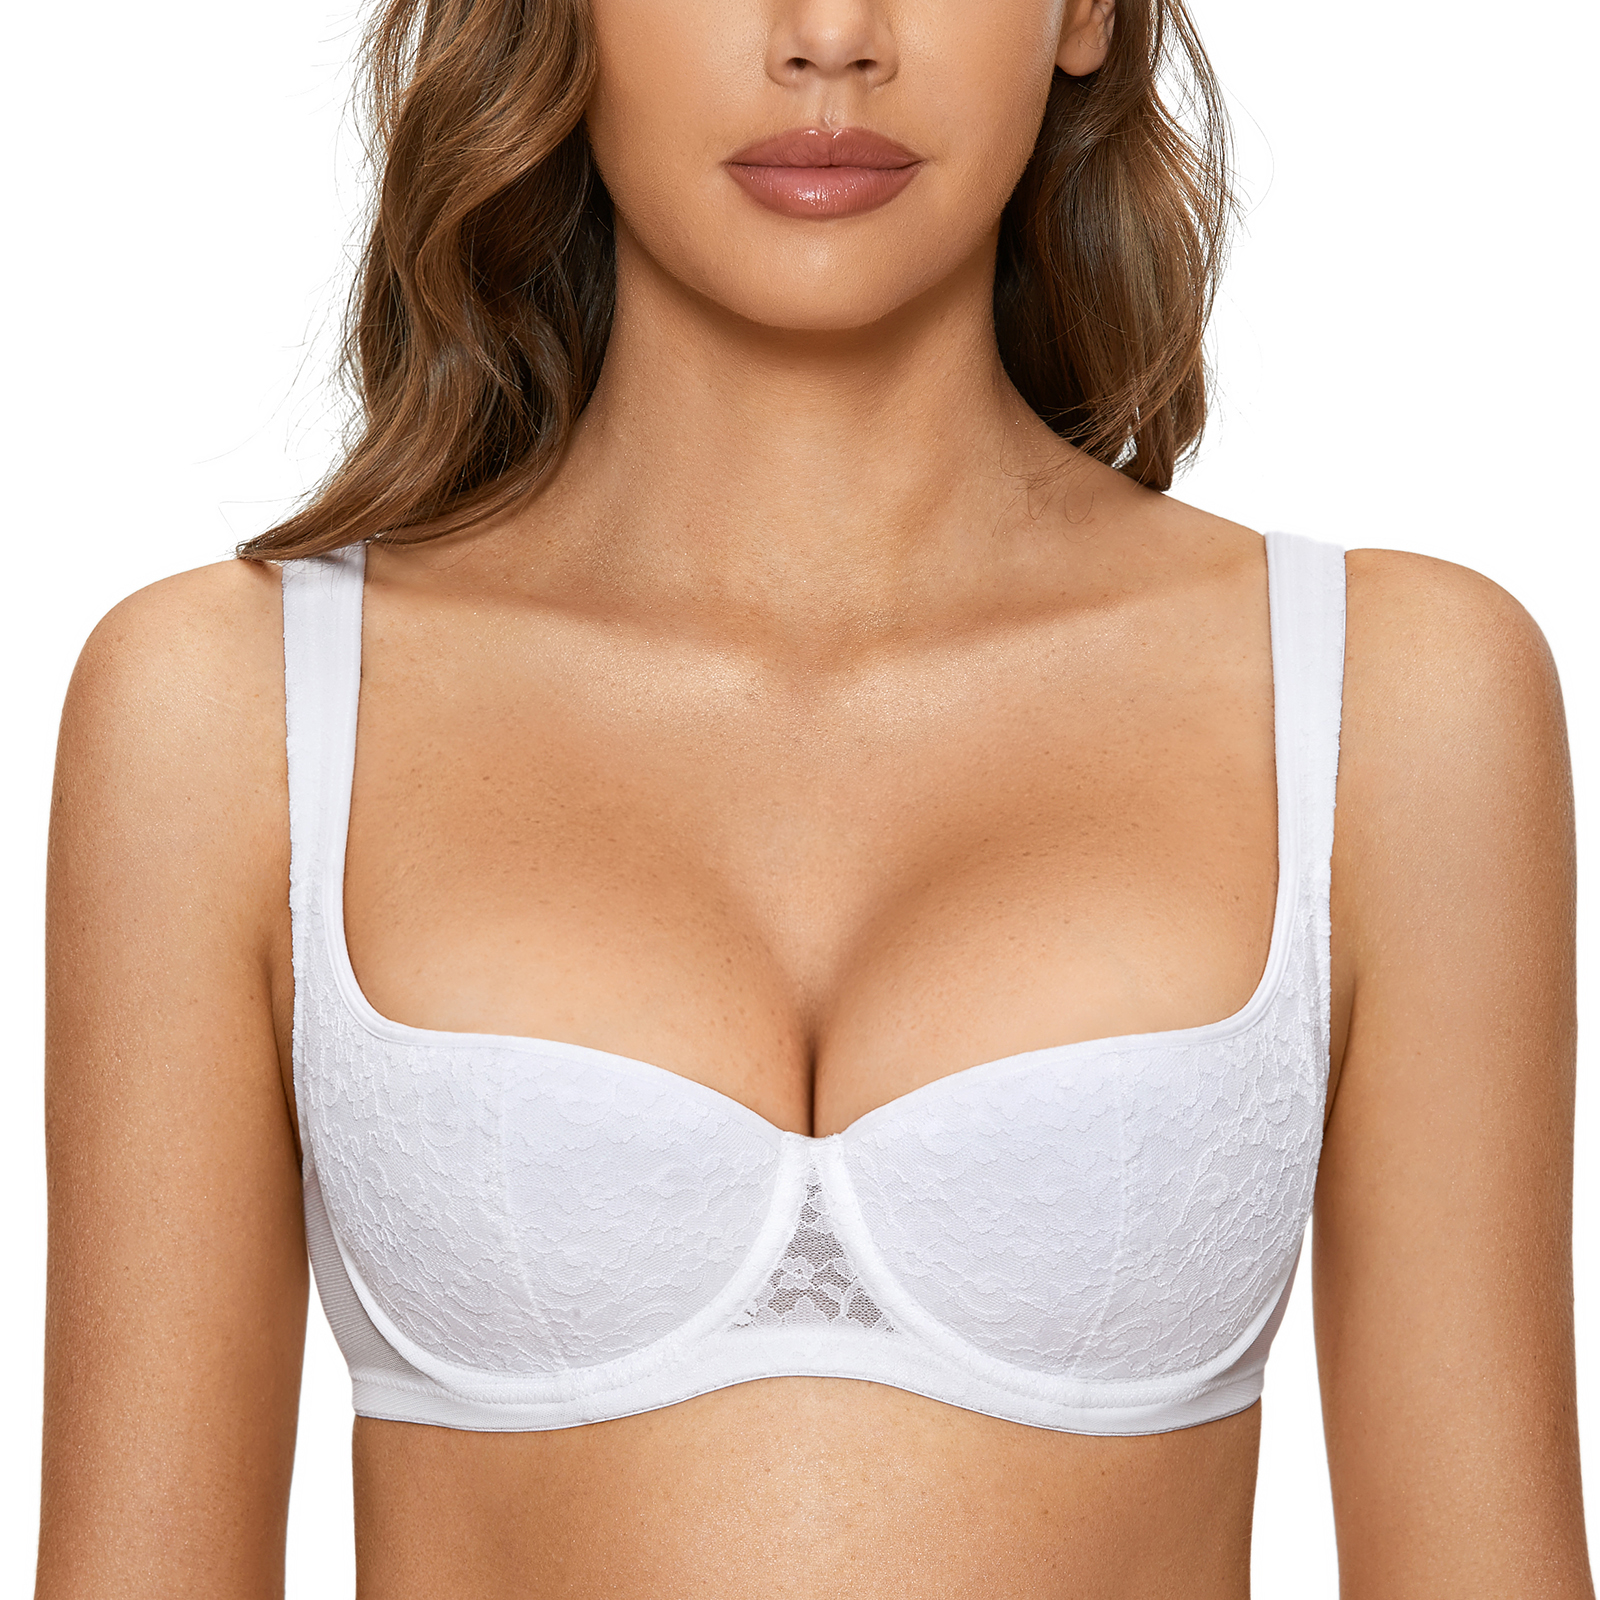 Cacique balconette bra, moulded foam cups, size 38H. GUC. Freshly washed &  line dried but we do have pets so a stray hair is possible. US shipping  only. PayPal or Zelle accepted.